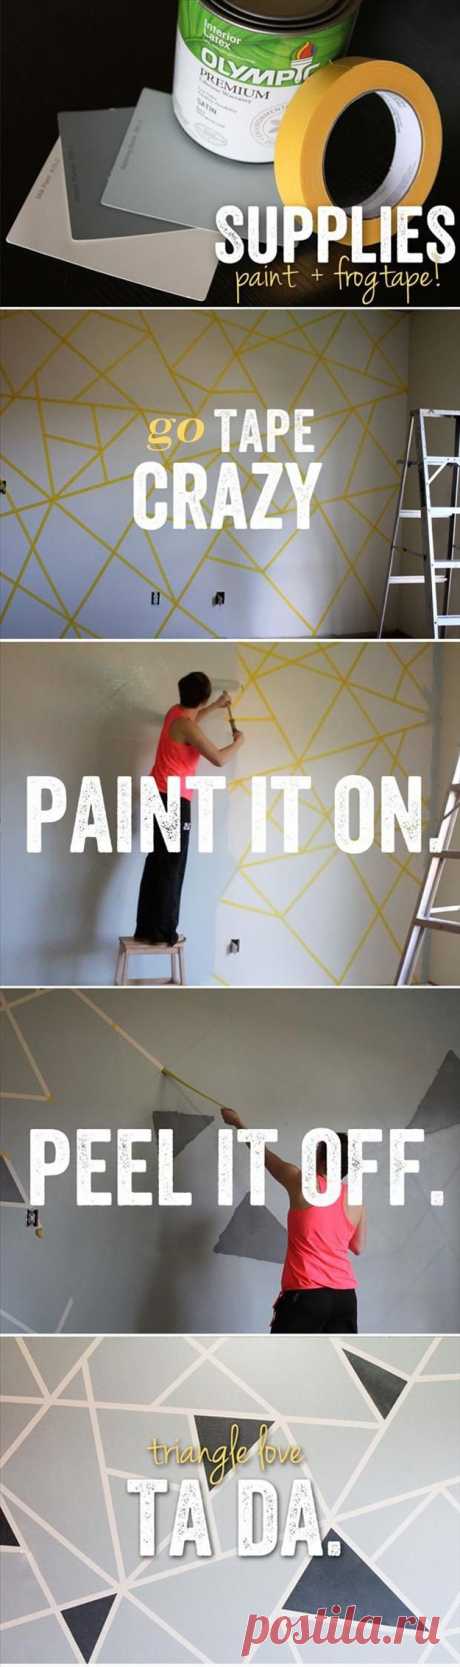 20 Cool Home Decor Wall Art Ideas for You to Craft DIYReady.com | Easy DIY Crafts, Fun Projects, &amp; DIY Craft Ideas For Kids &amp; Adults